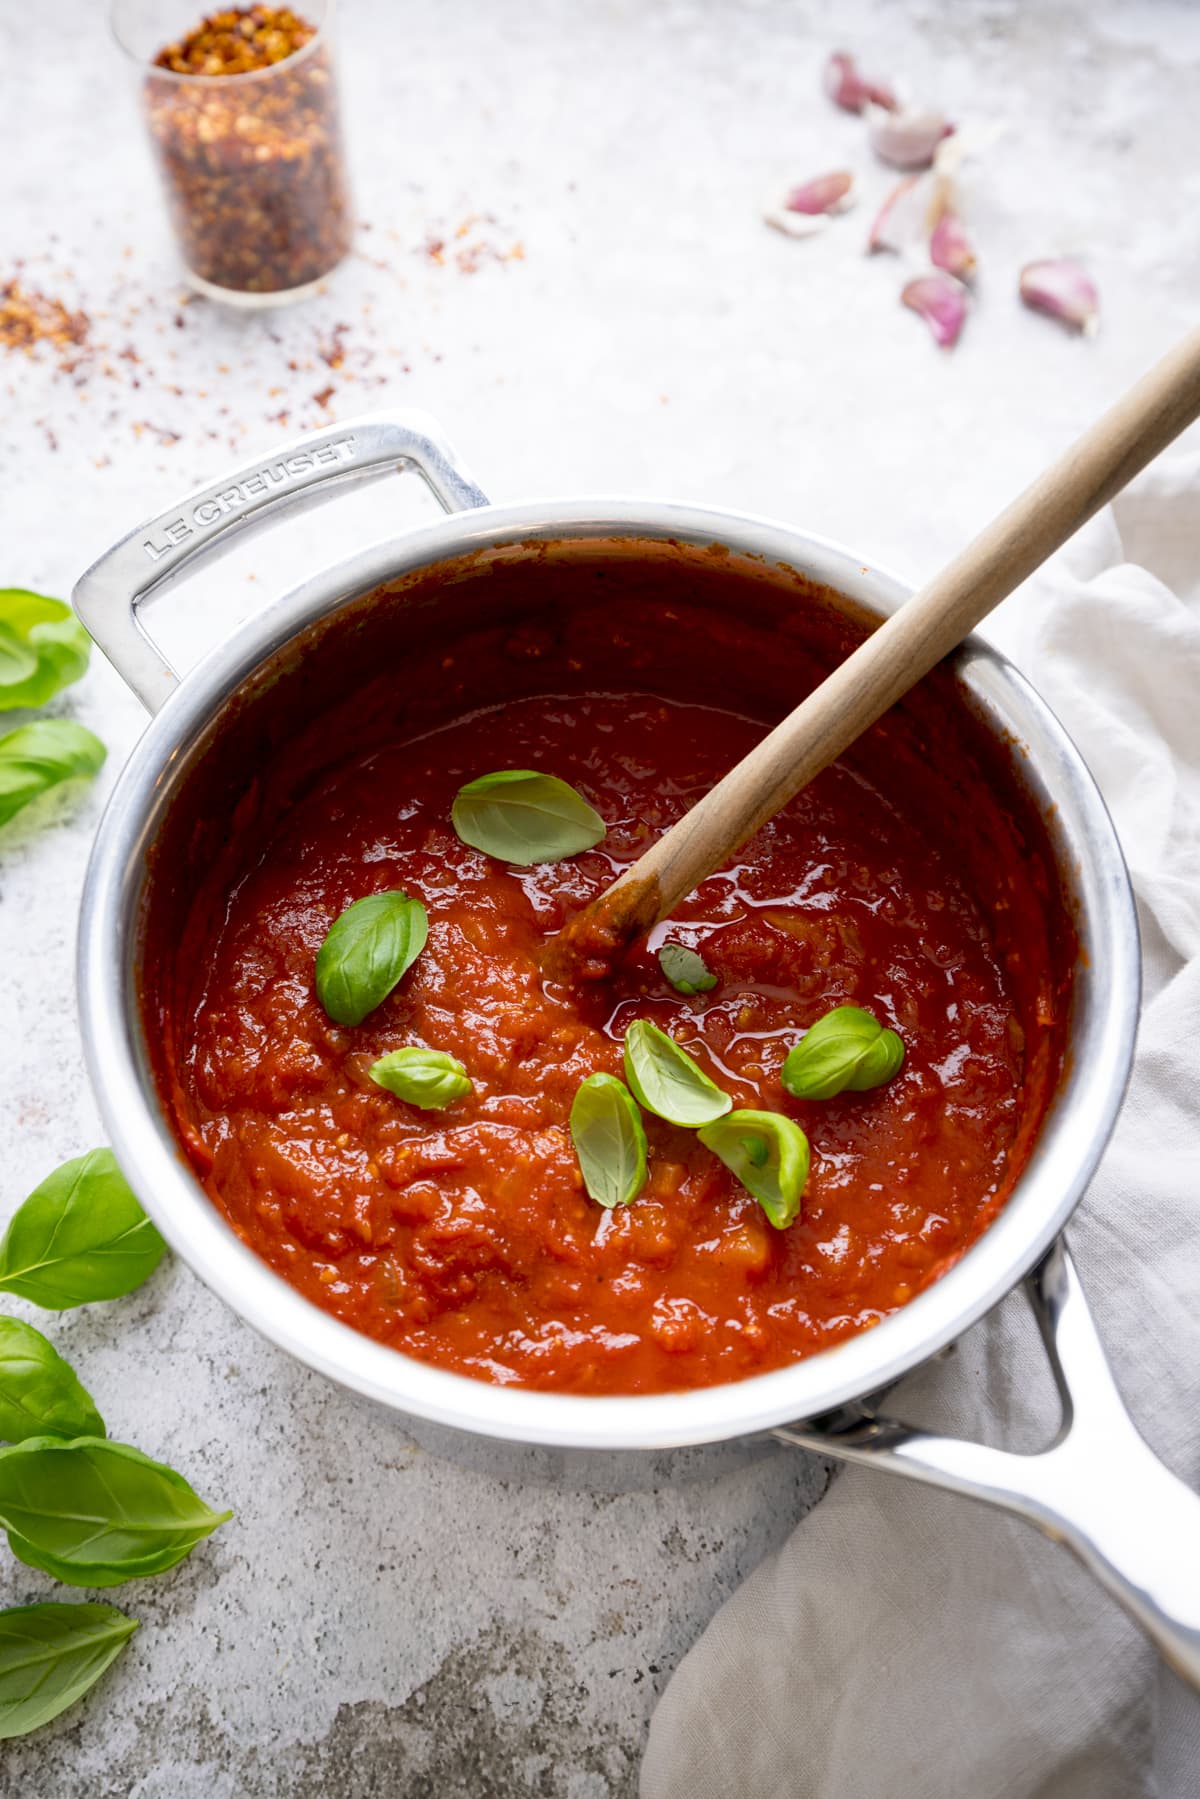 Image from above of a silver pan filled with arrabbiata sauce on a light background.  There is a cooking spoon and fresh basil leaves sprinkled into the sauce.  Surrounding the pan are basil leaves, garlic cloves, and a jar of chili flakes.